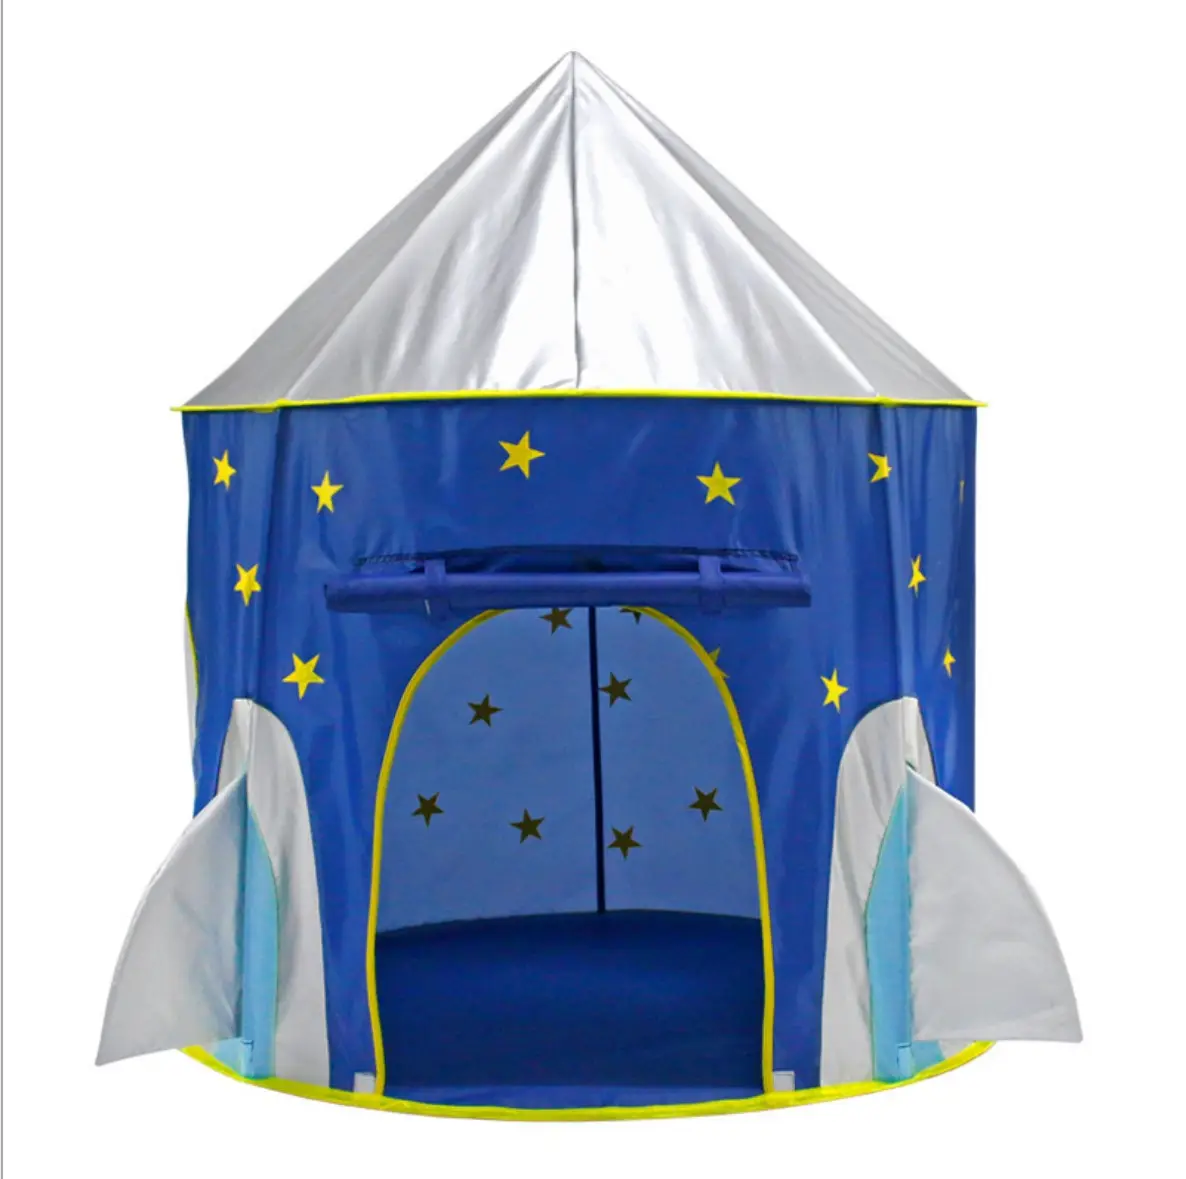 Rocket Ship Play Tent For Kids Spaceship Toys Astronaut Space Ship Tents For Children's House